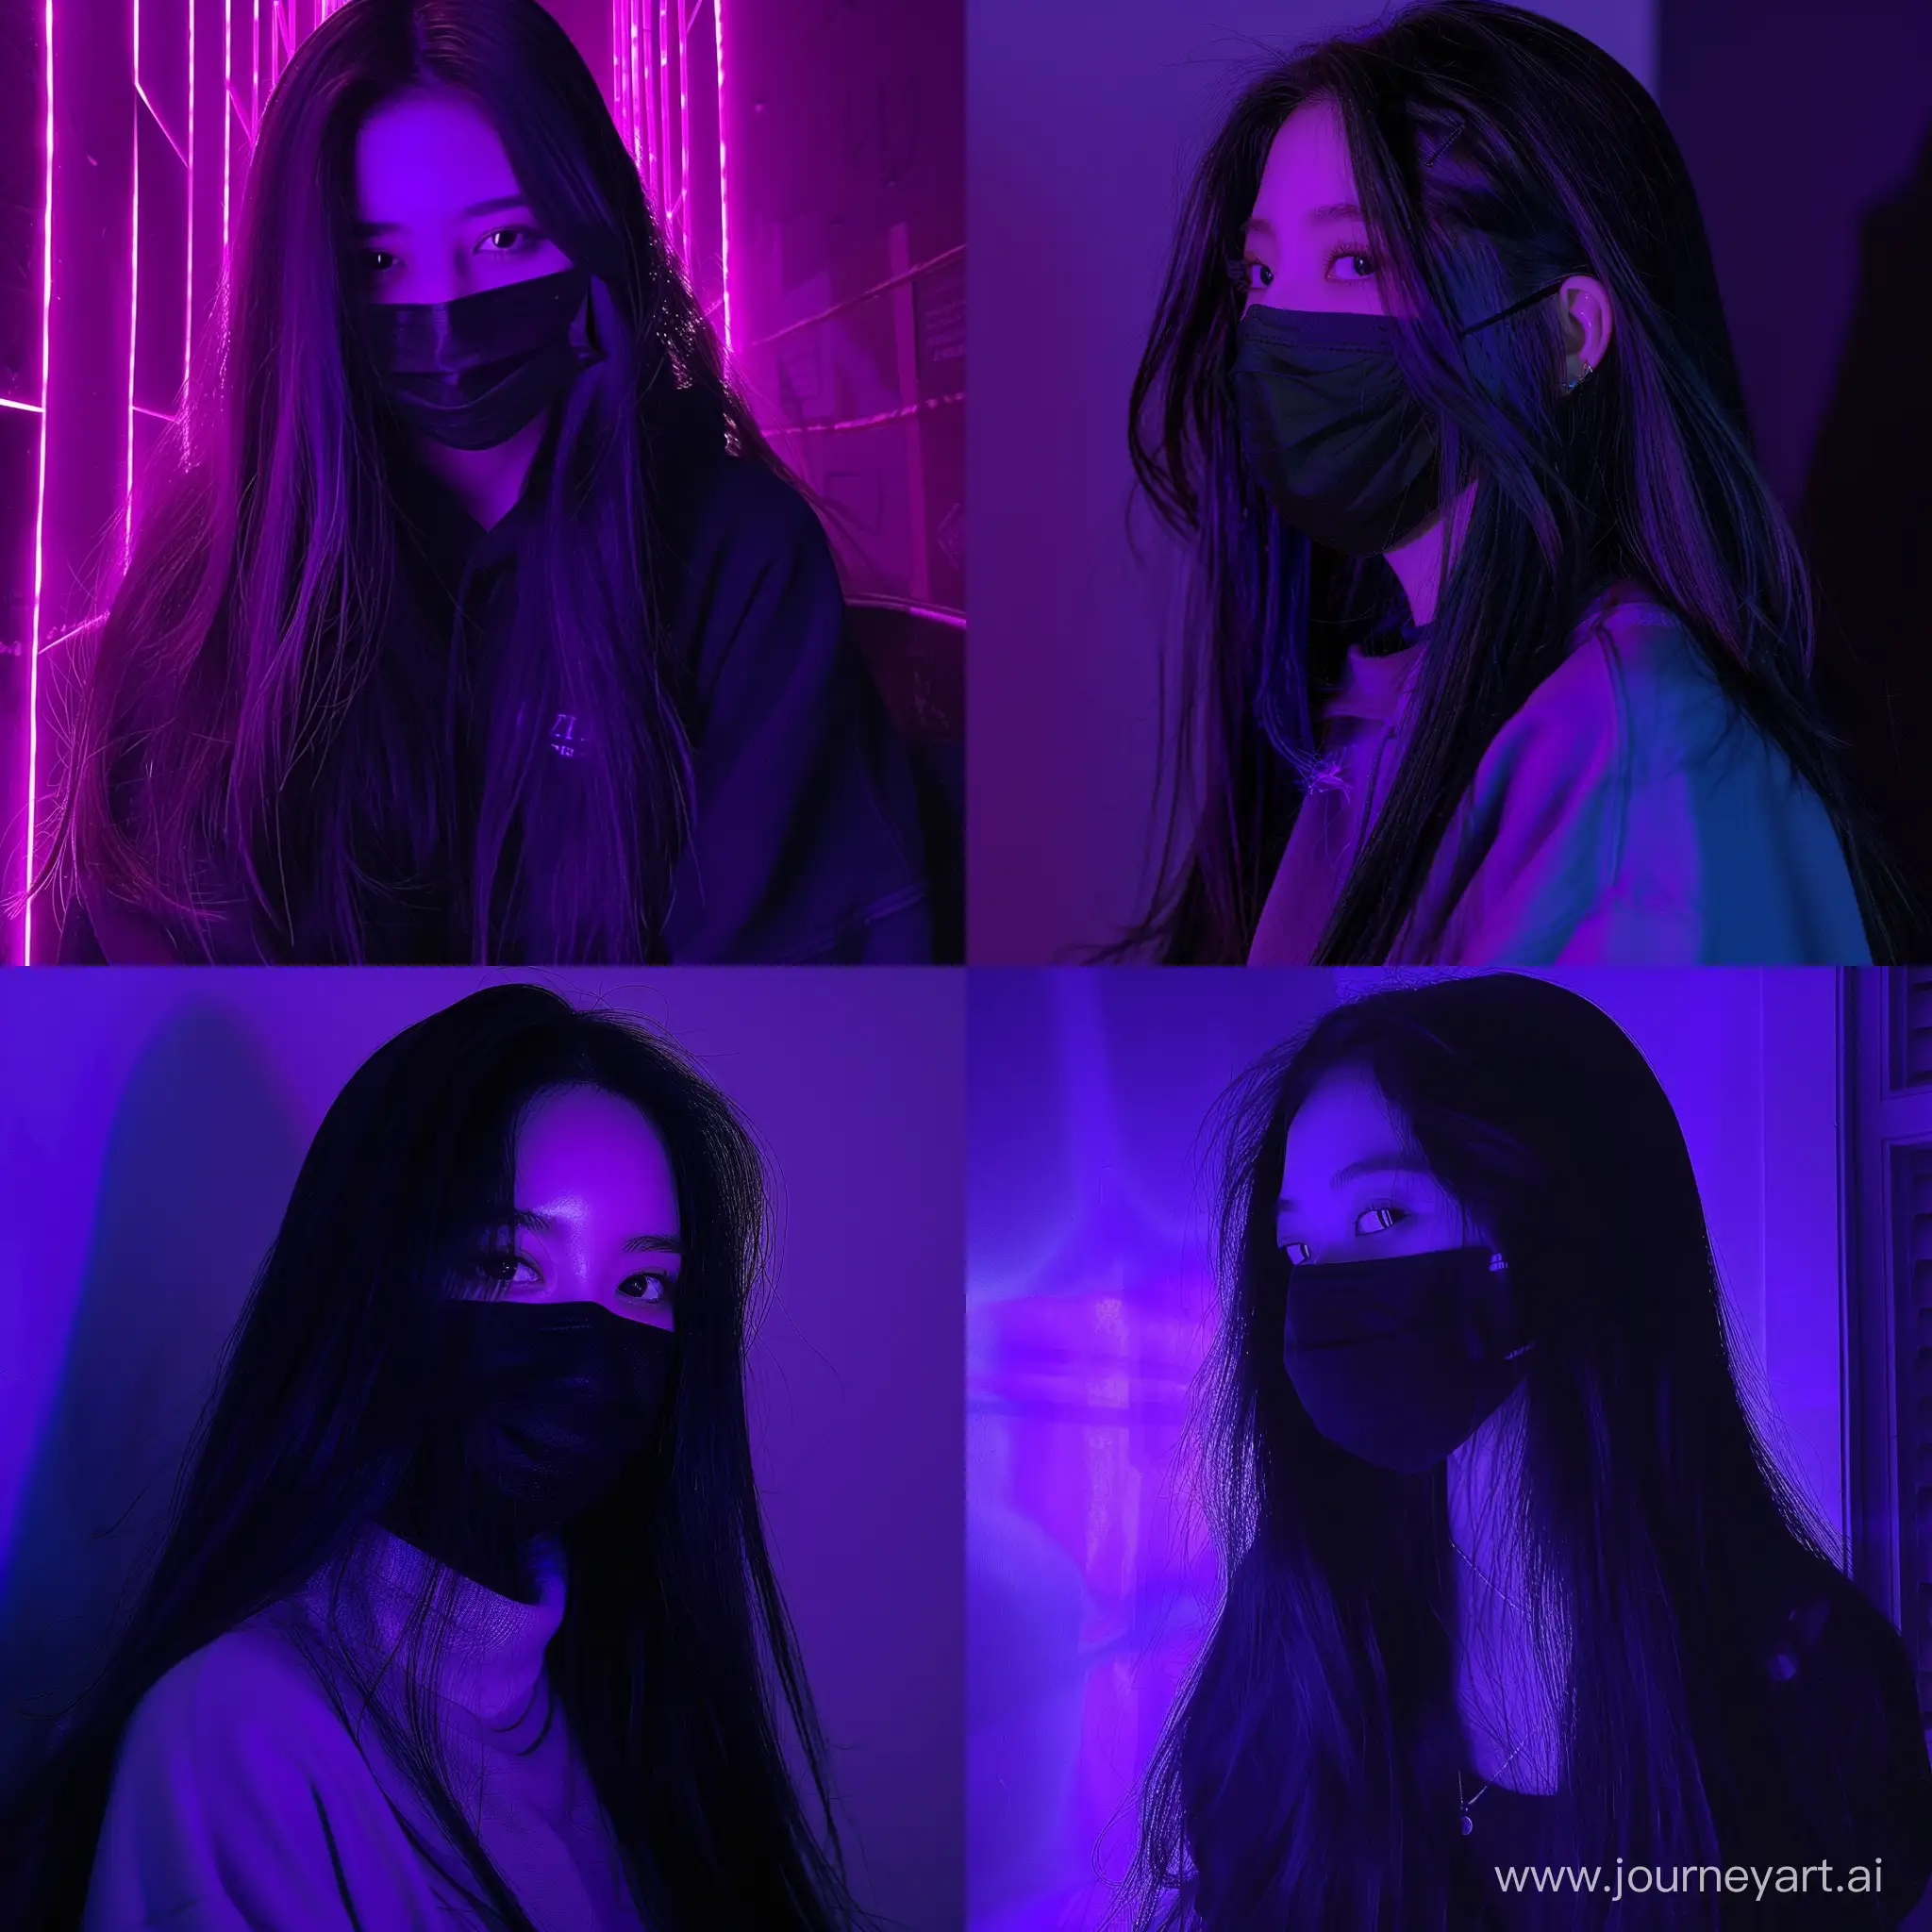 Dark-Room-Portrait-Stylish-Girl-with-Long-Black-Hair-and-Facemask